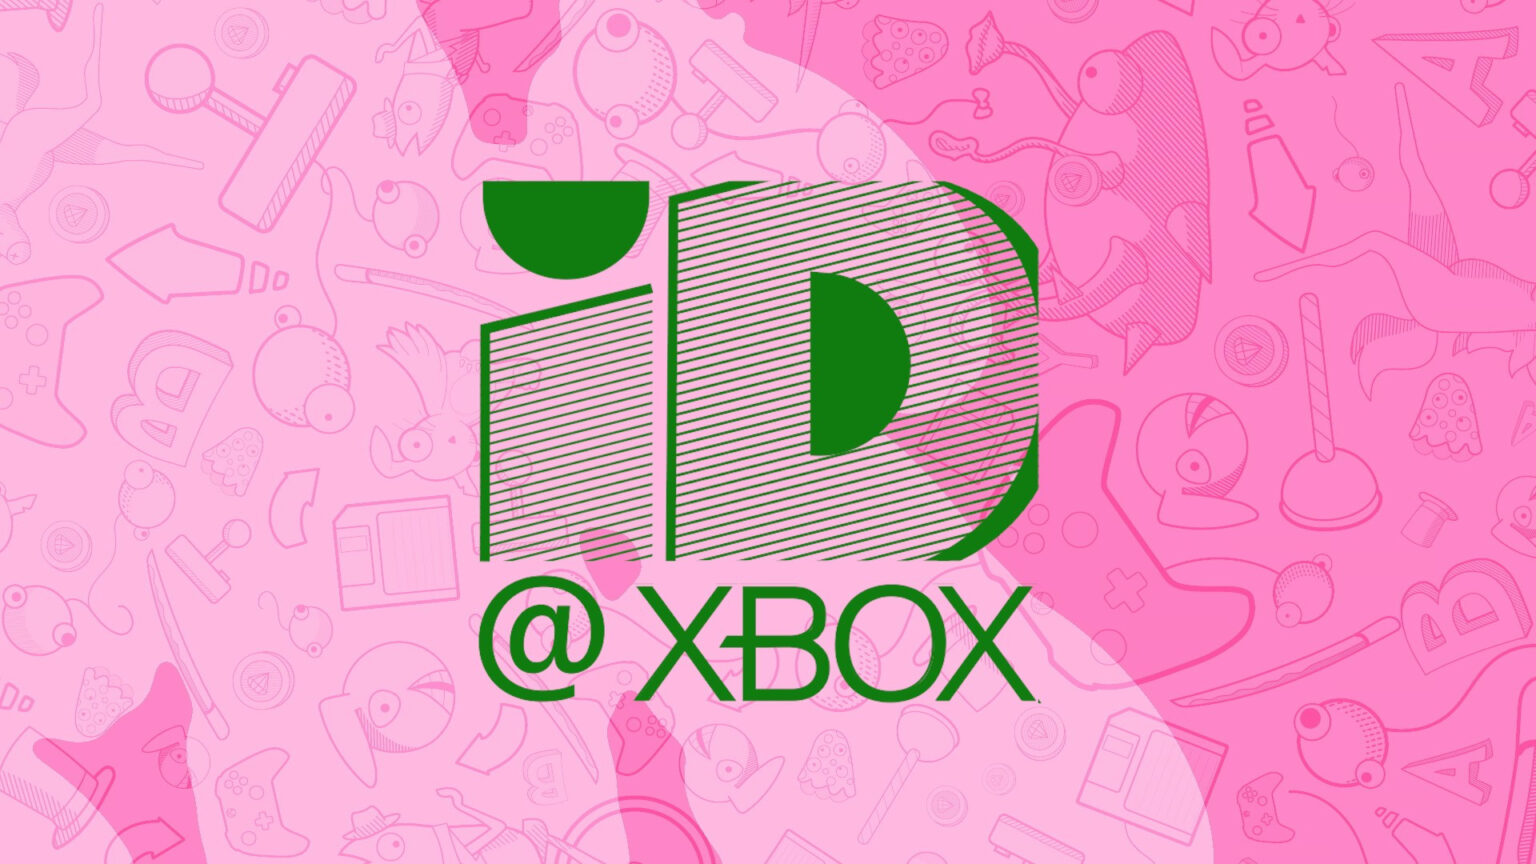 5 ID@Xbox Games We Really Want To Play